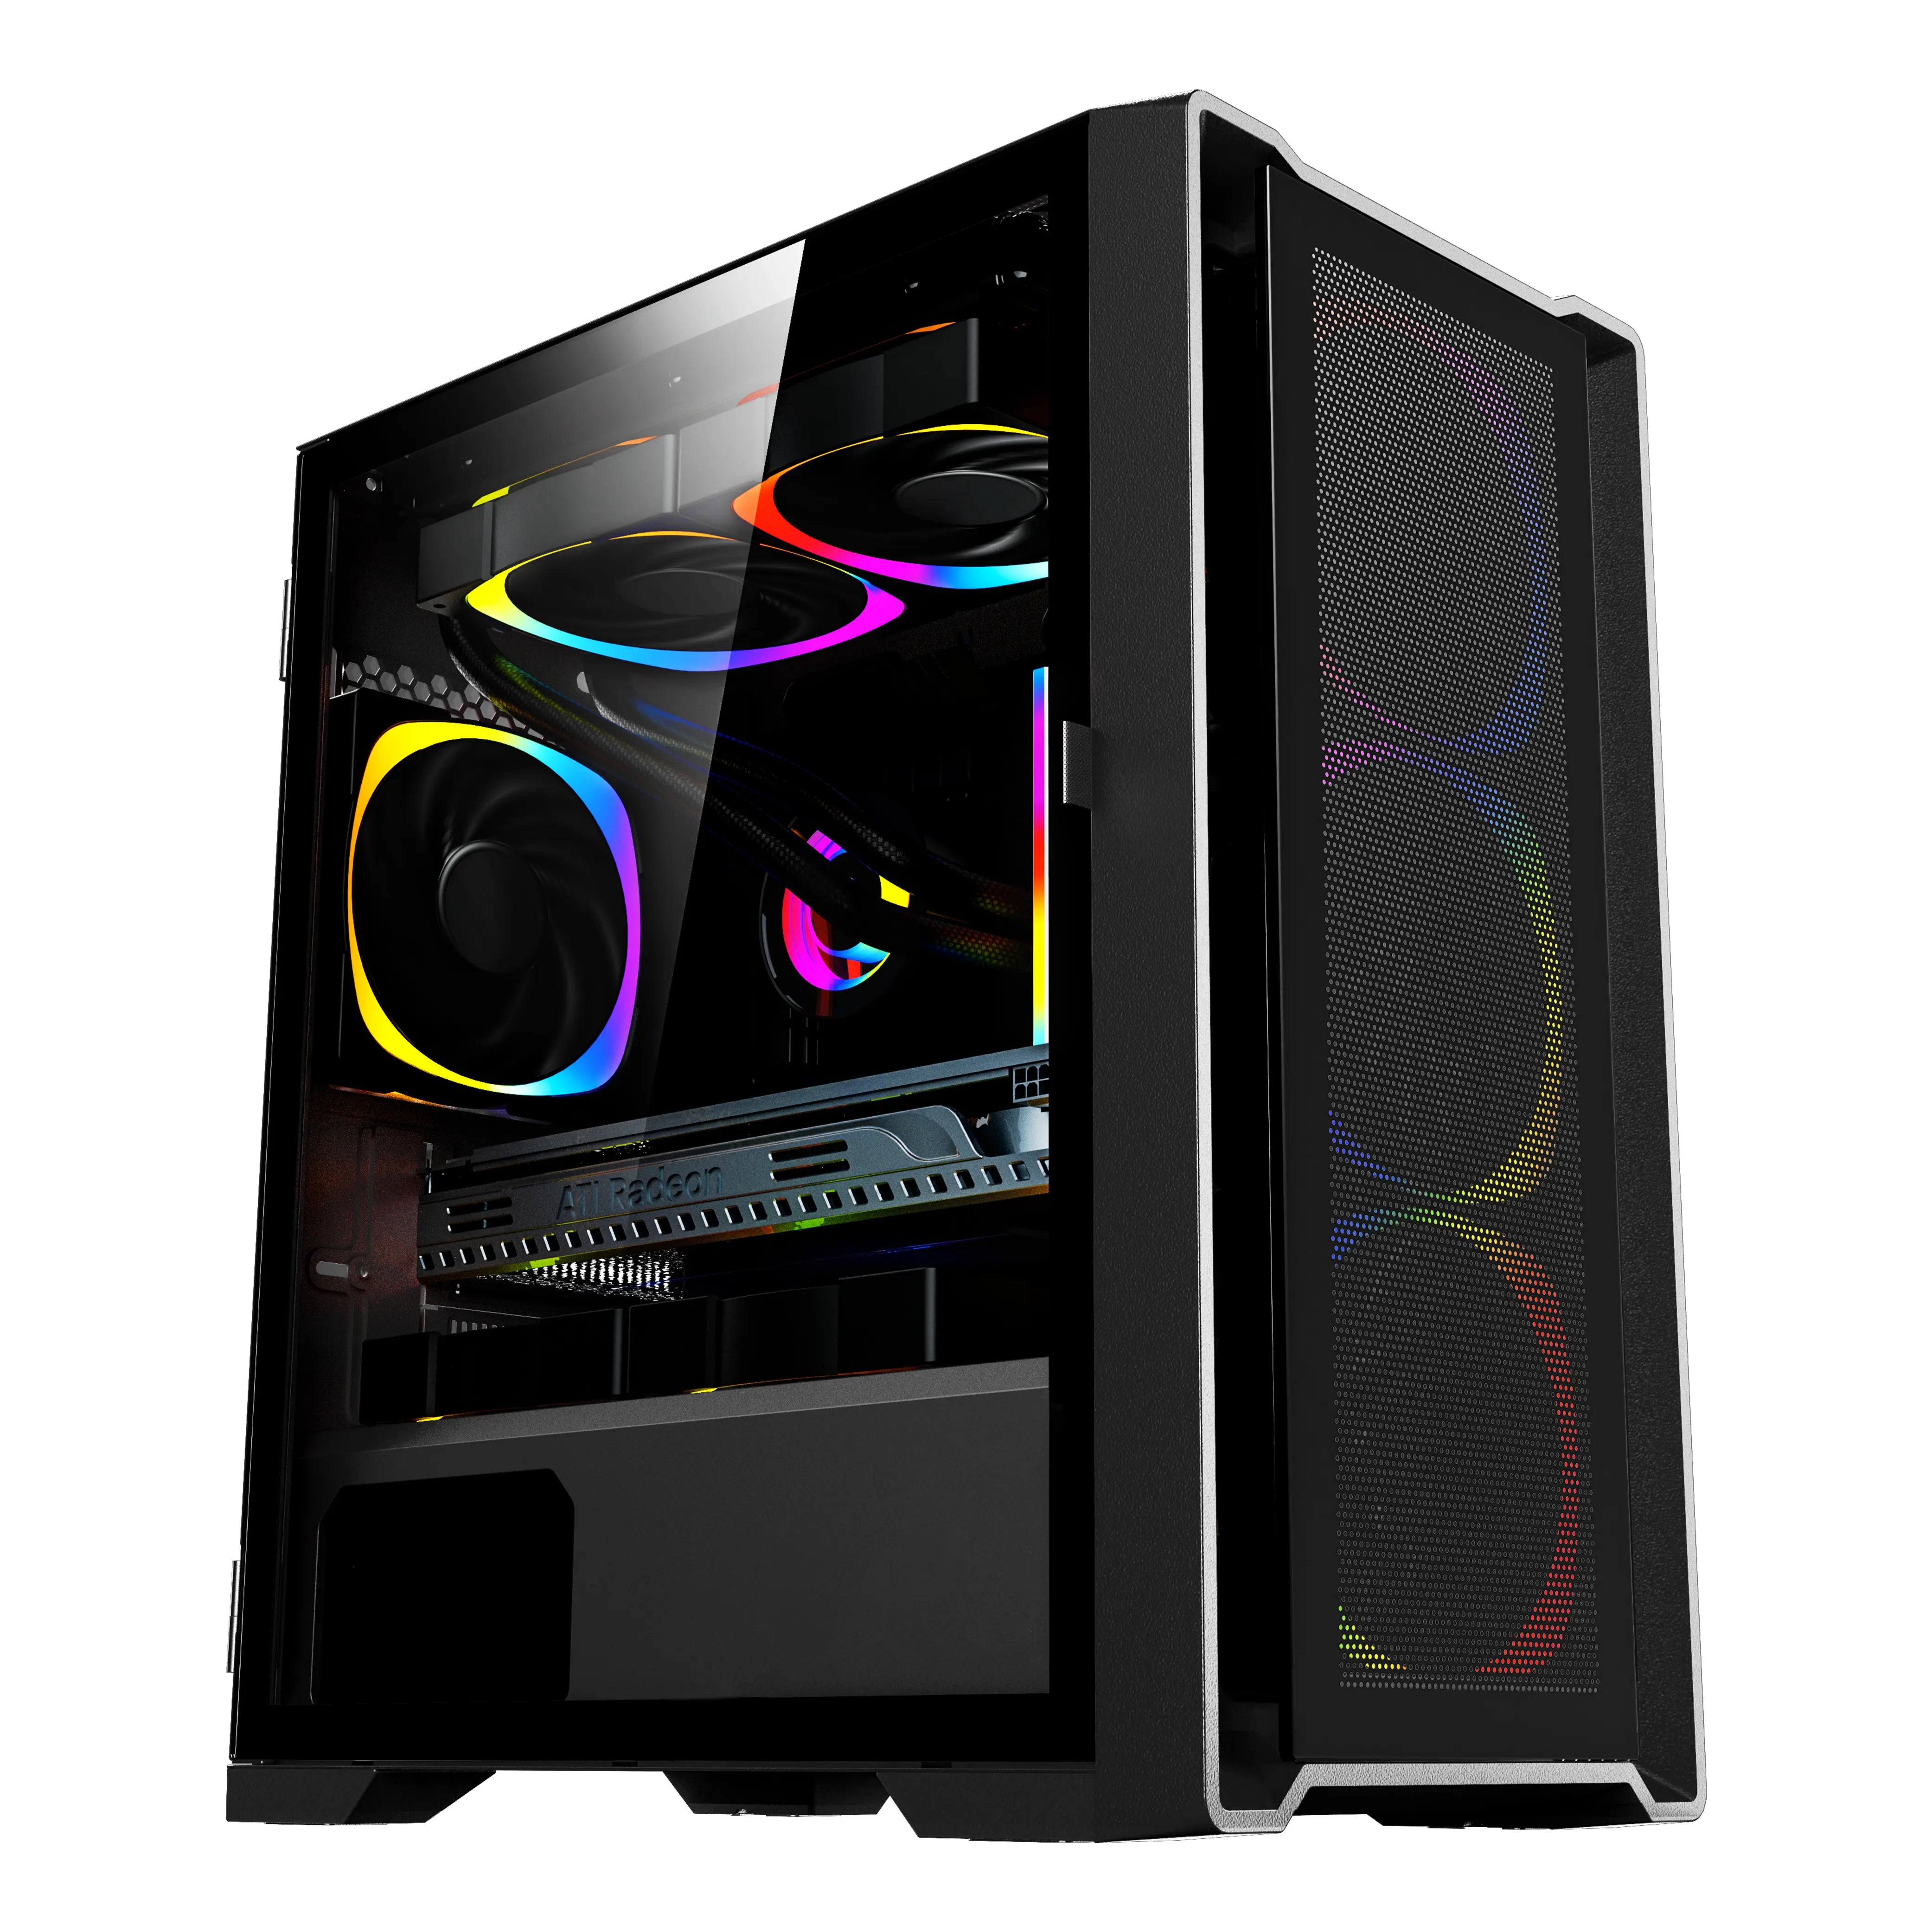 Aurora ATX/M-ATX/ITX Gaming PC Desktop Computer Case Black with Side Tempered Glass Panels with 6 Fan Support